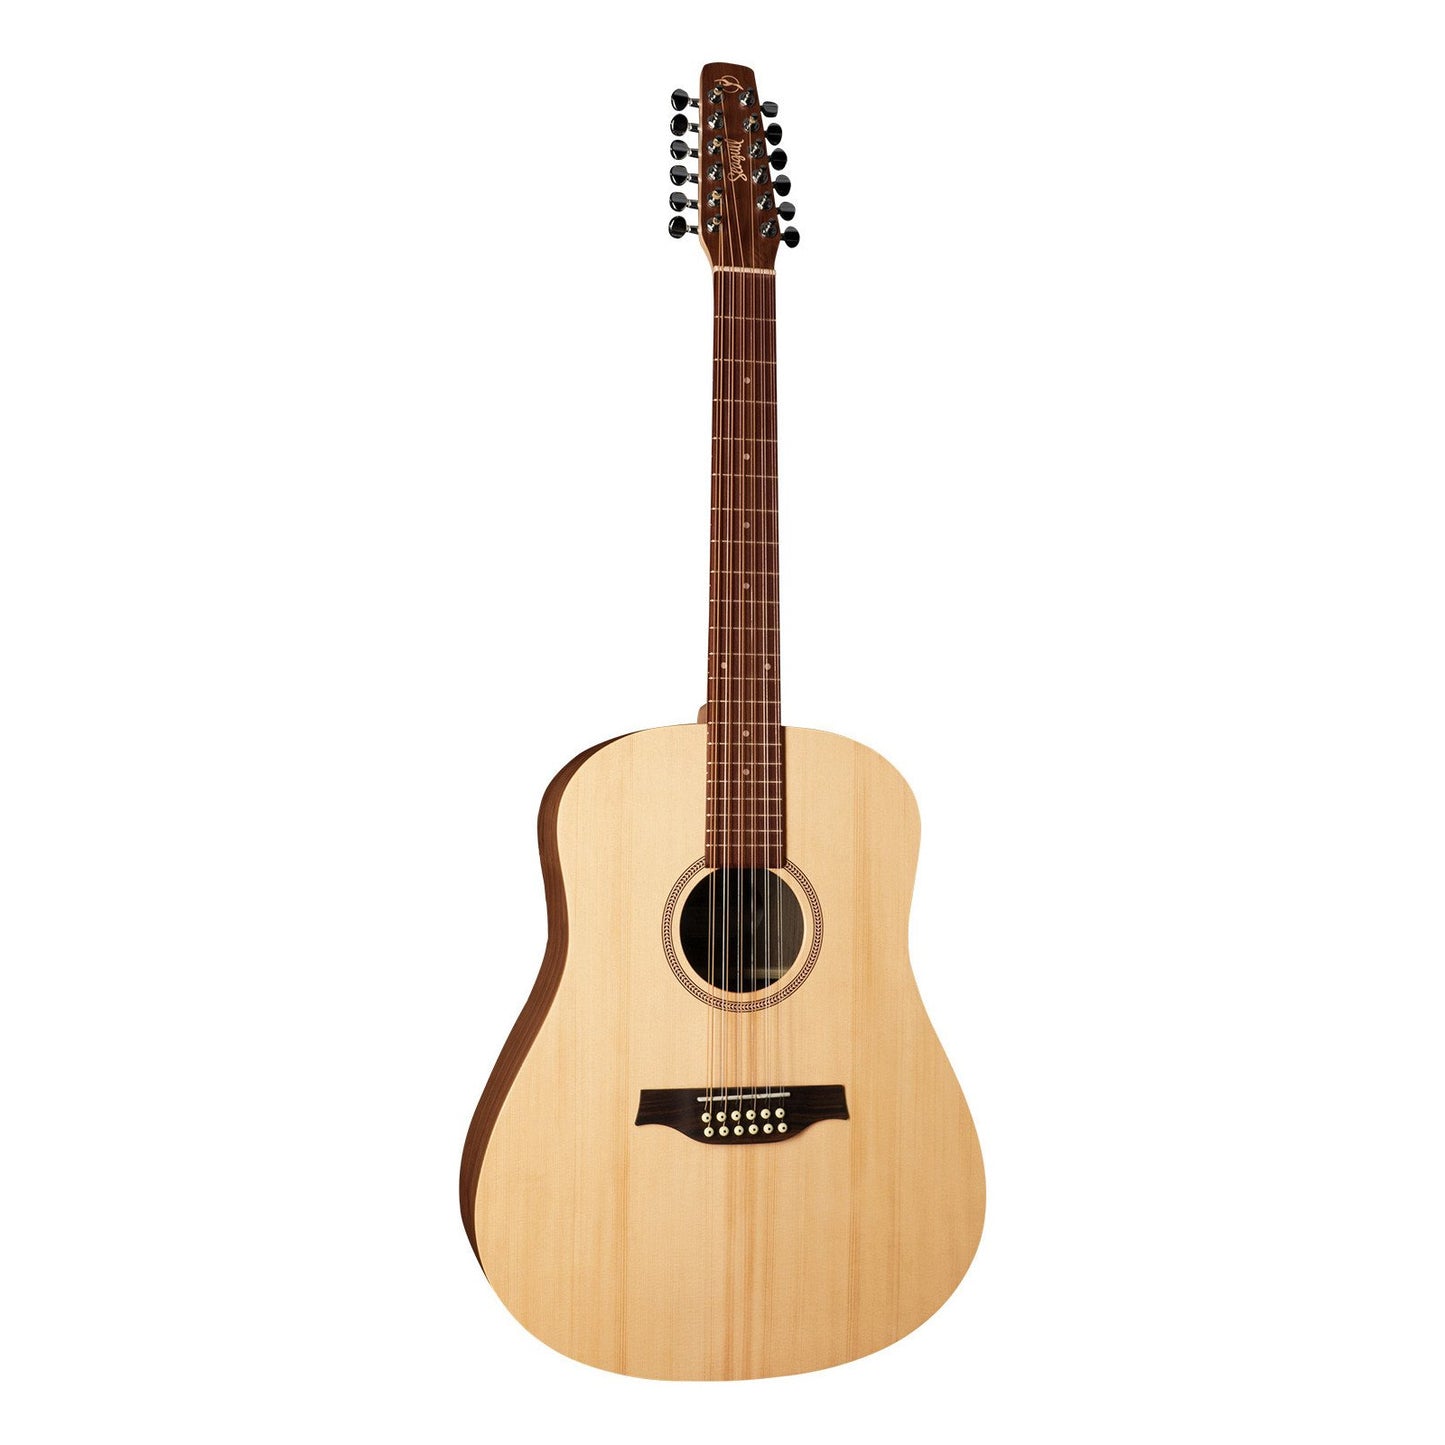 Seagull Excursion Walnut 12 SG Isys T 12-String Acoustic Guitar Natural